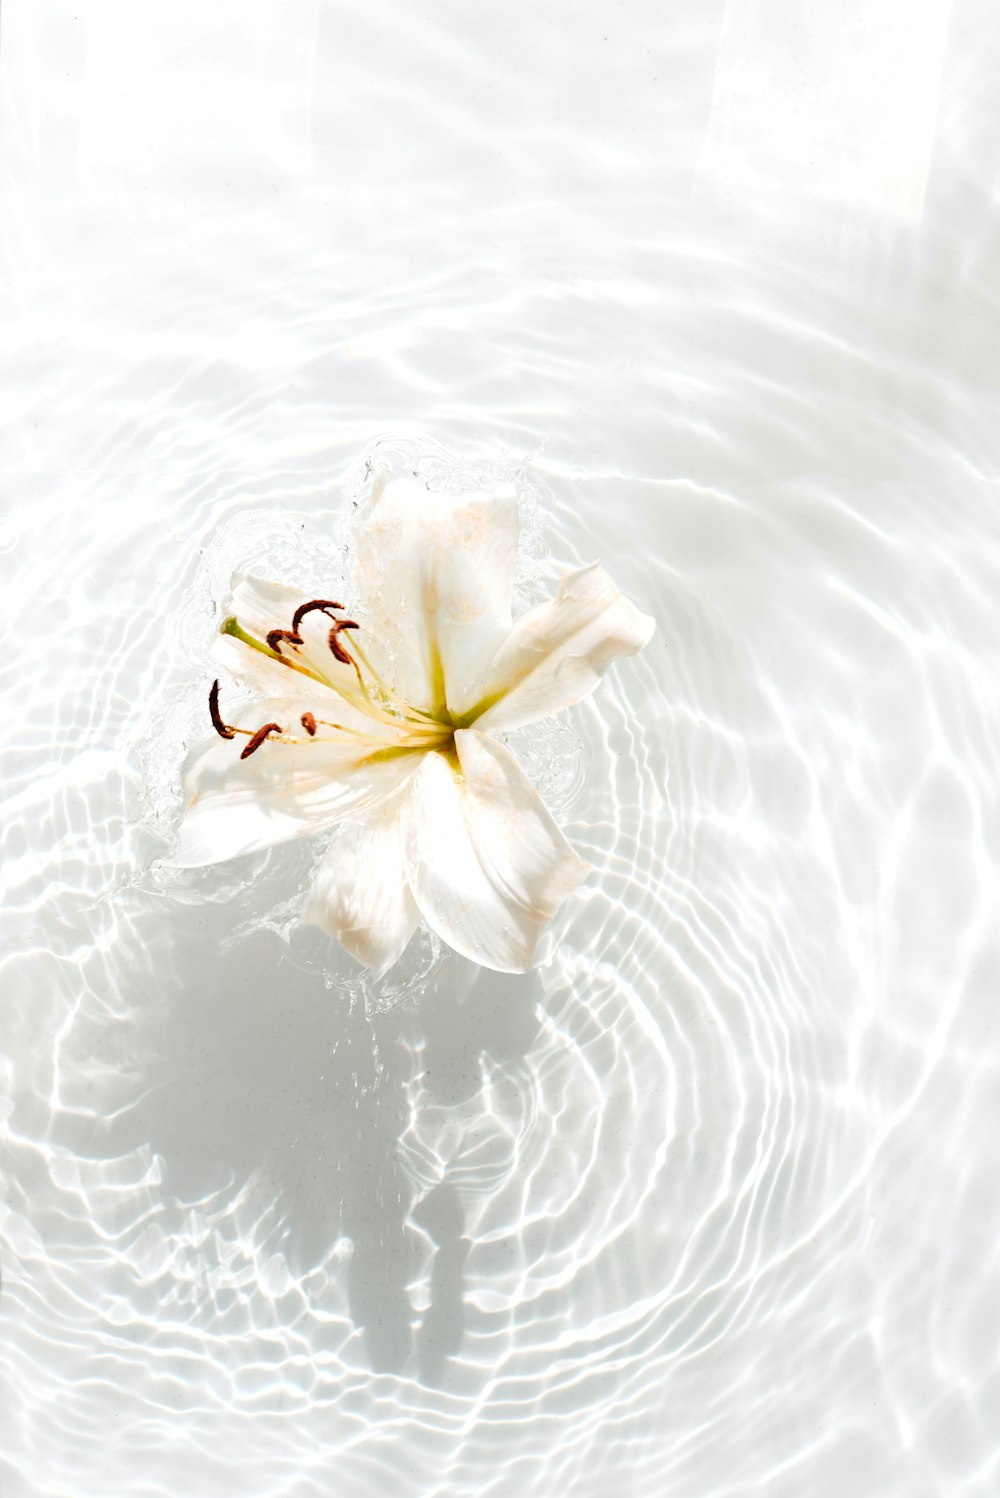 100+ White Flower Pictures | Download Free Images on Unsplash